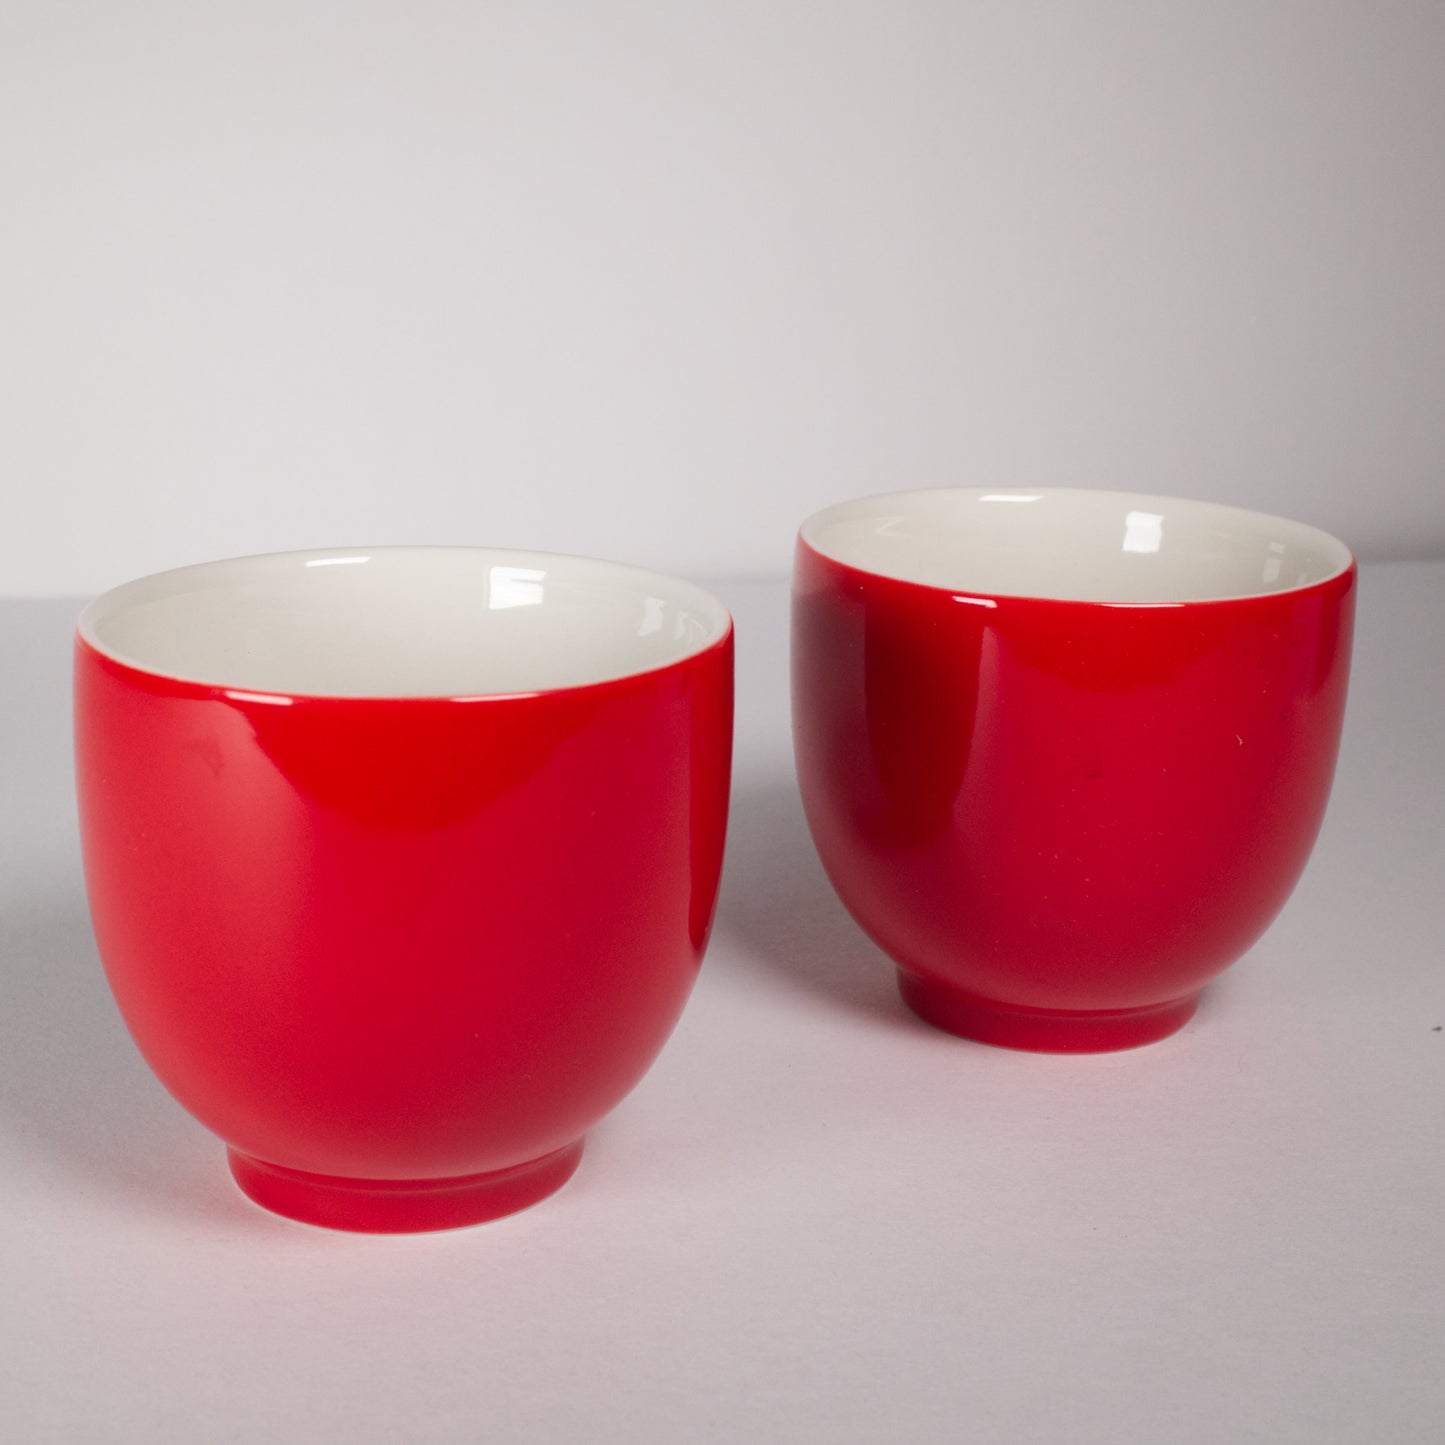 Little Red Cup Ceramic Tumbler – Little Red Cup Tea Co.